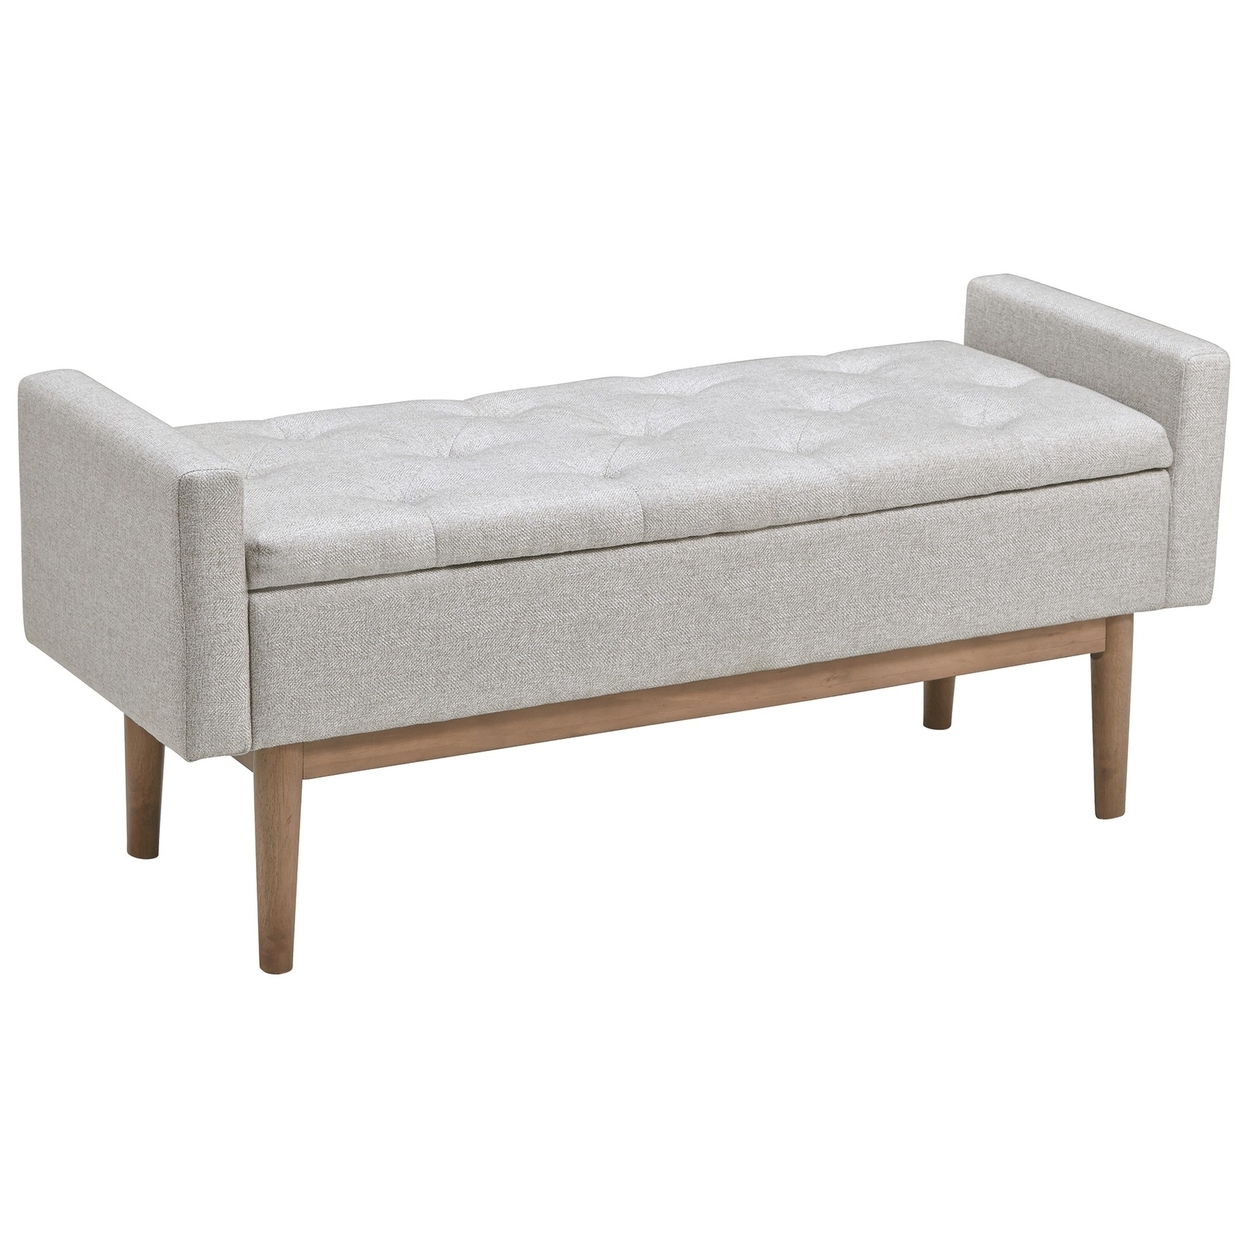 Tufted Fabric Storage Bench With Low Profile Elevated Arms, Light Gray- Saltoro Sherpi